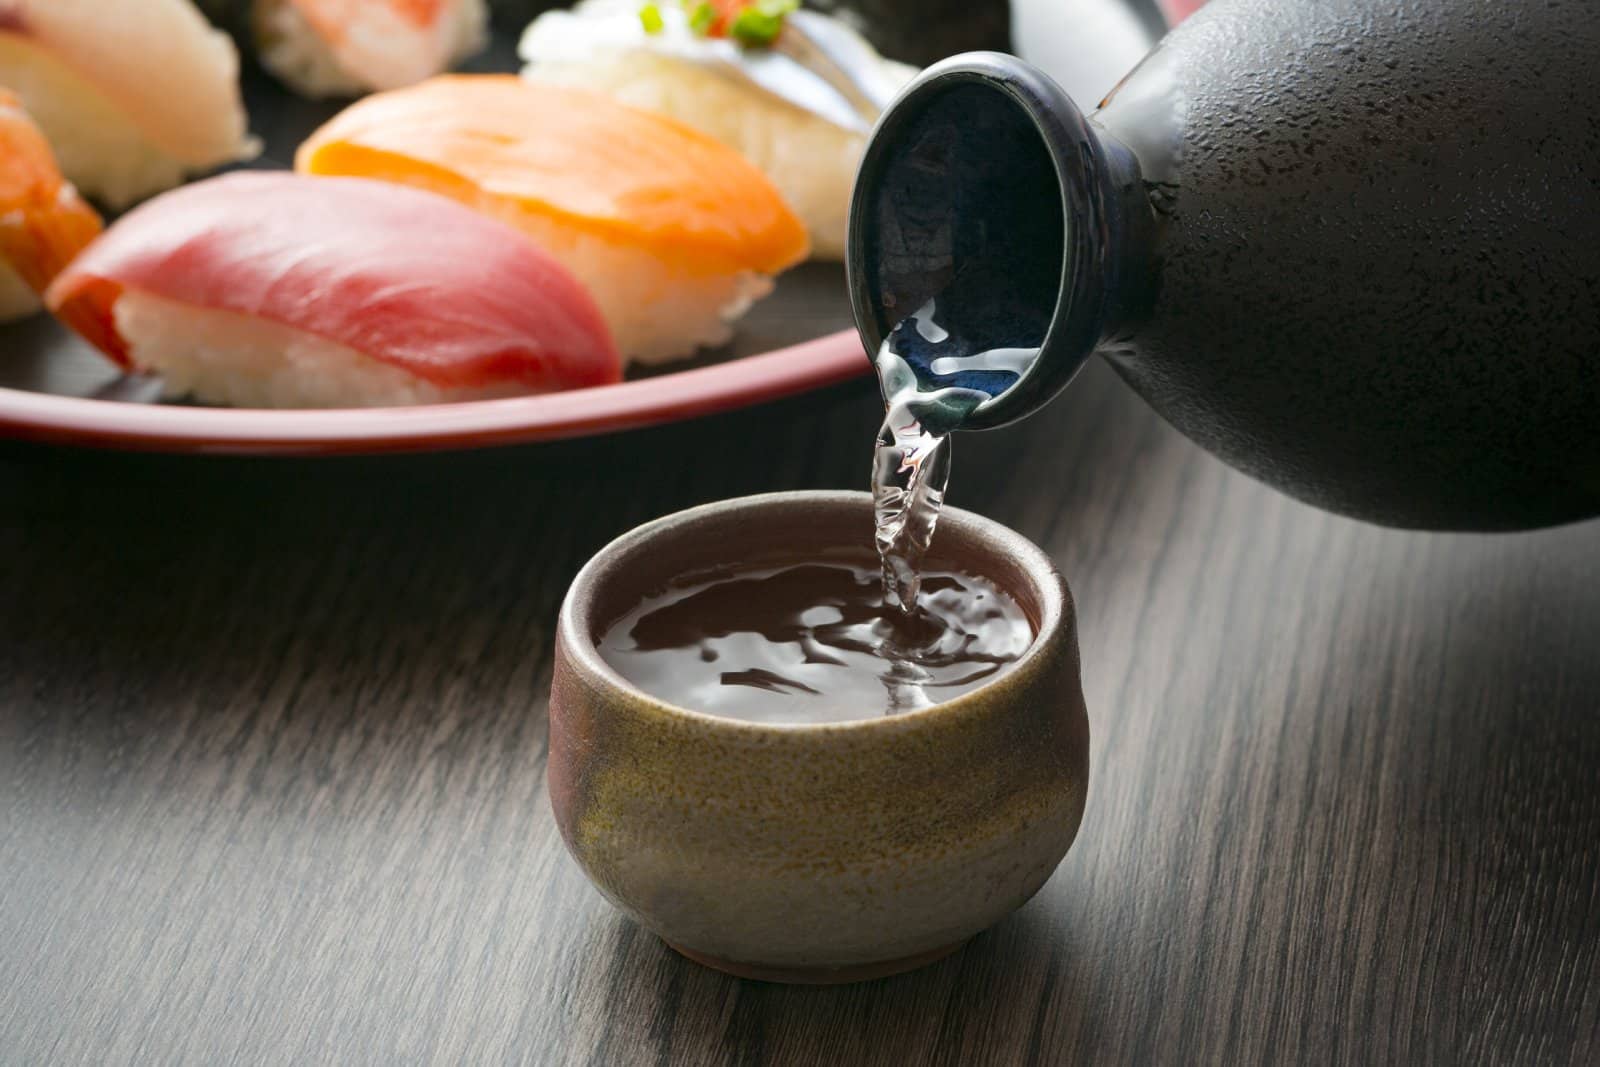 Image Credit: Shutterstock / Shinari <p>Discover the delicate art of sushi making and sake tasting in Tokyo, the birthplace of sushi.</p>